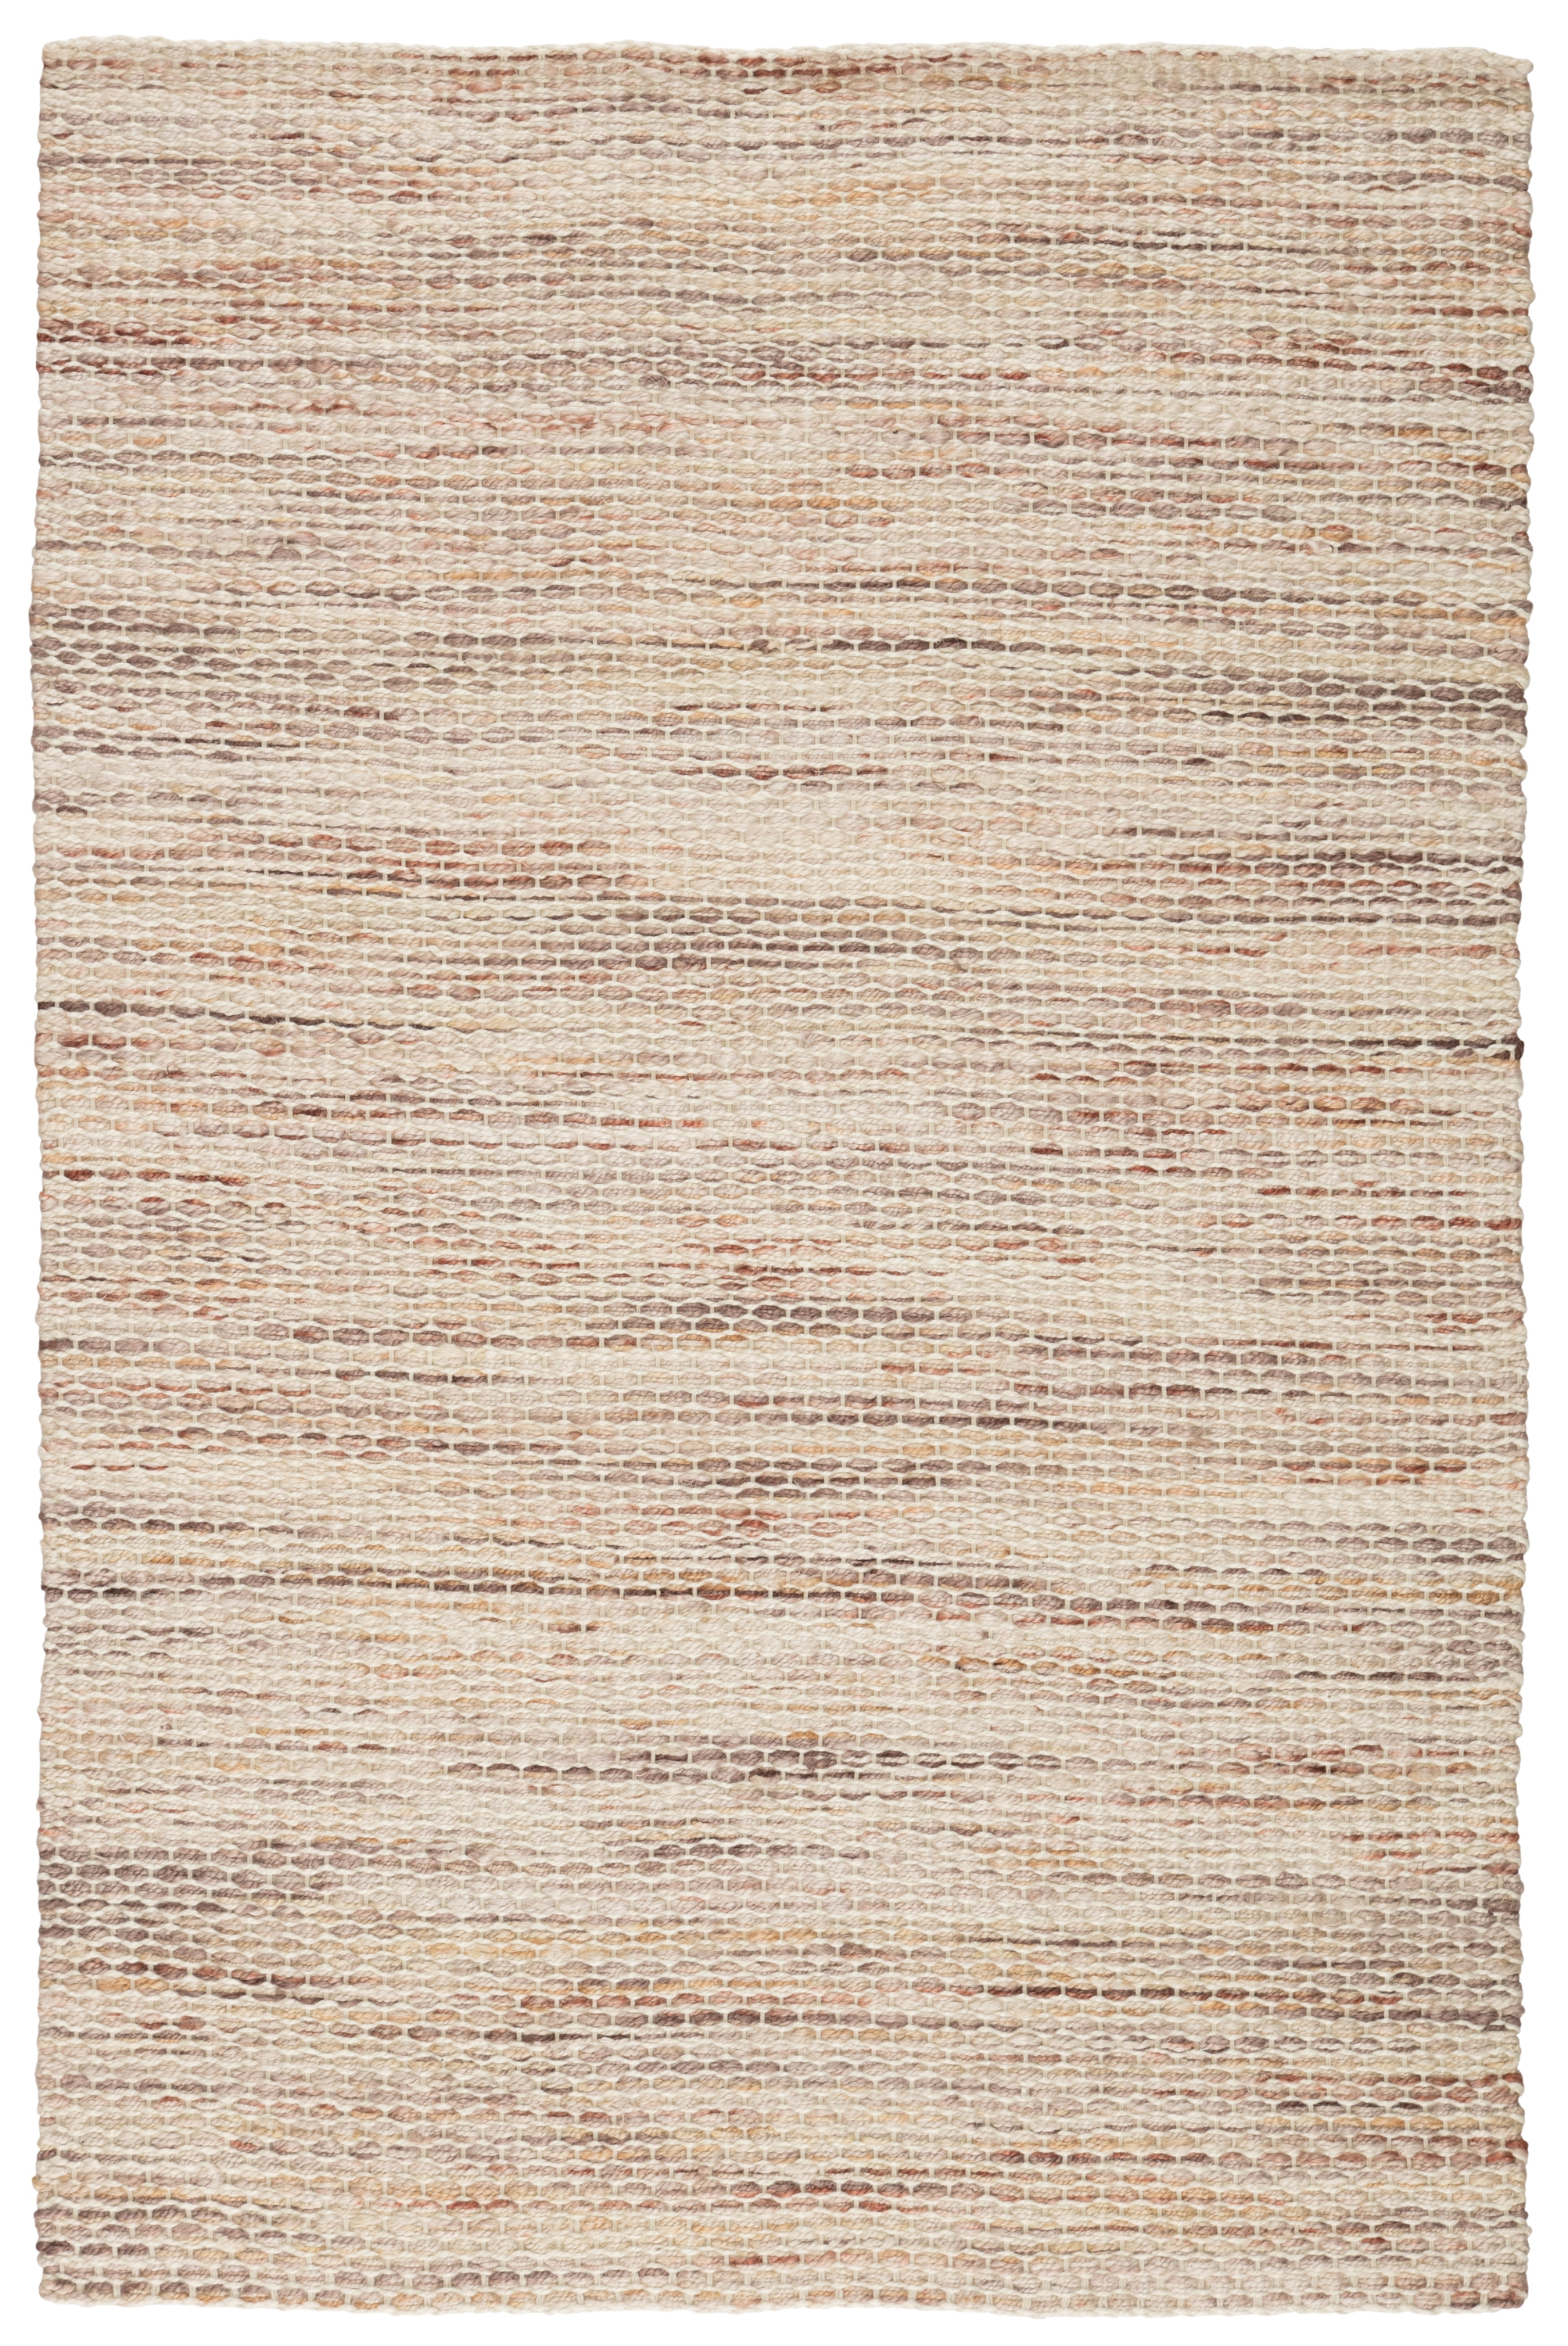 Cirra Natural Solid Ivory/ Terra Cotta Area Rug (9'X12') - Image 0